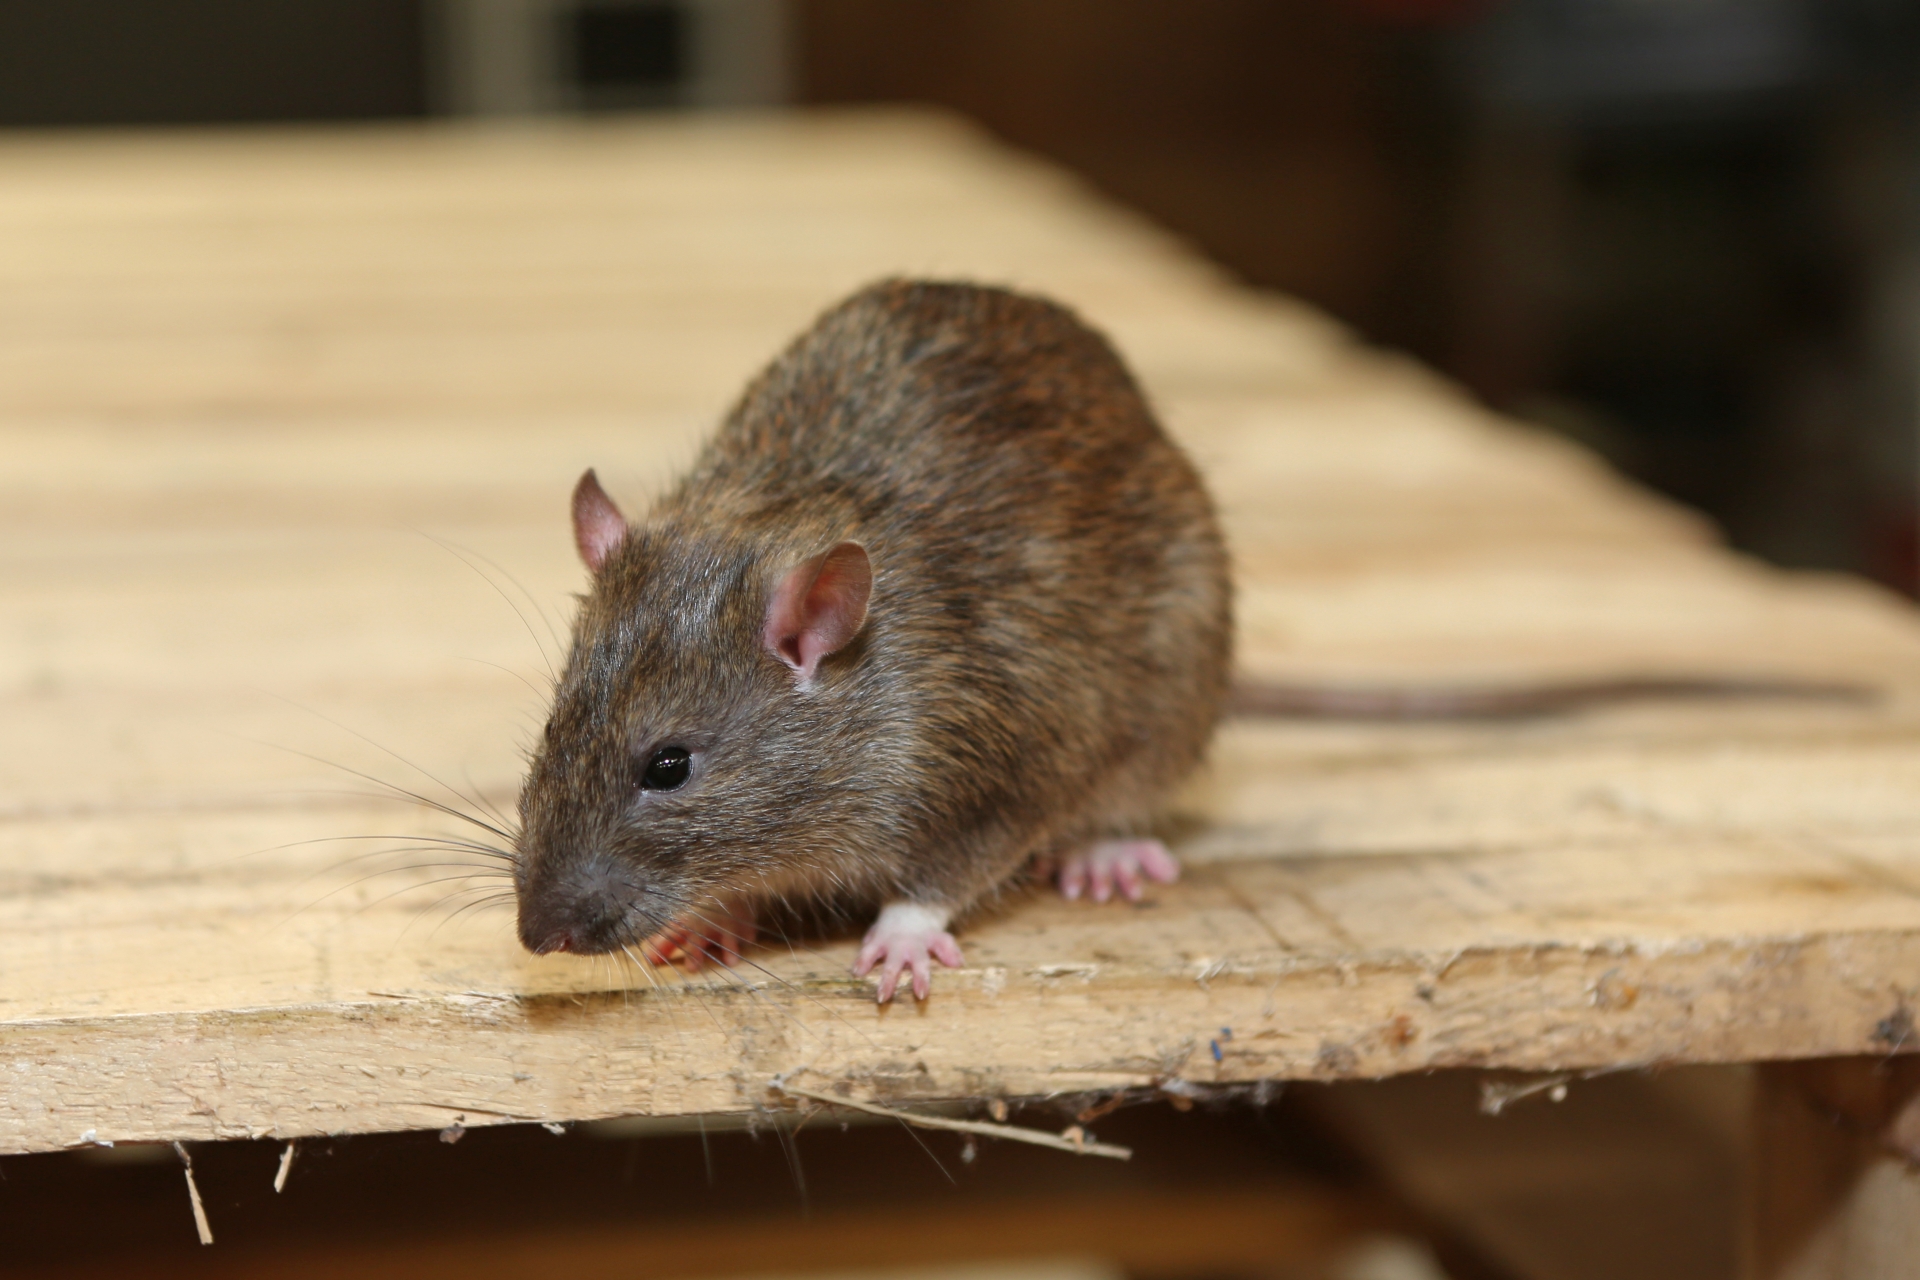 Rat Infestation, Pest Control in Kew, North Sheen, TW9. Call Now 020 8166 9746